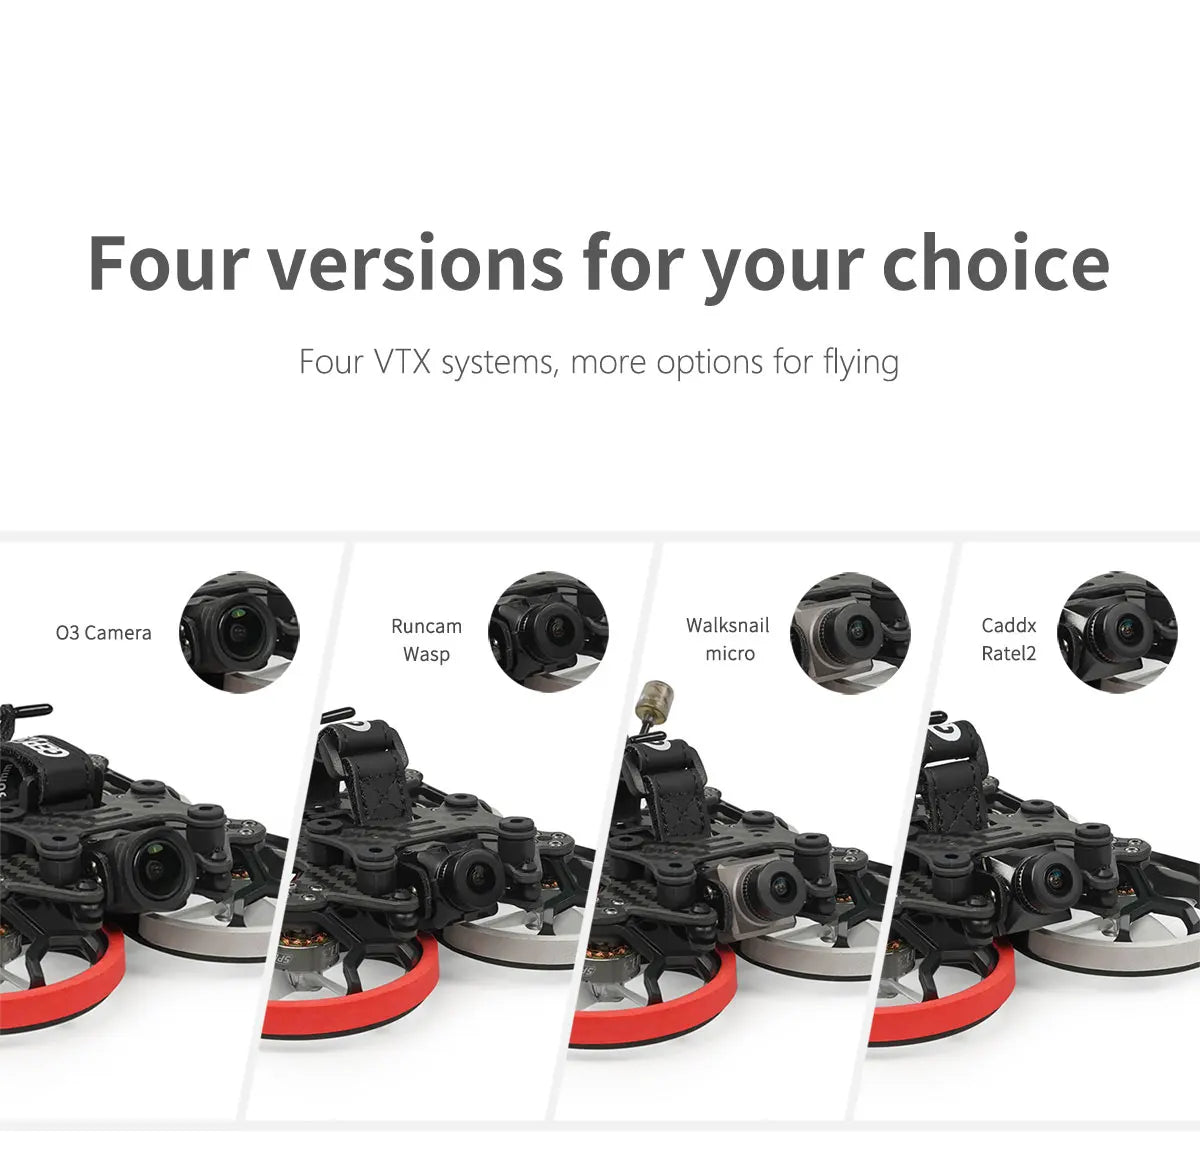 GEPRC Cinelog20 HD - O3 AIR Unit  FPV, GEPRC Cinelog20 HD, four versions for your choice Four VTX systems, more options for flying 03 Camera Runcam